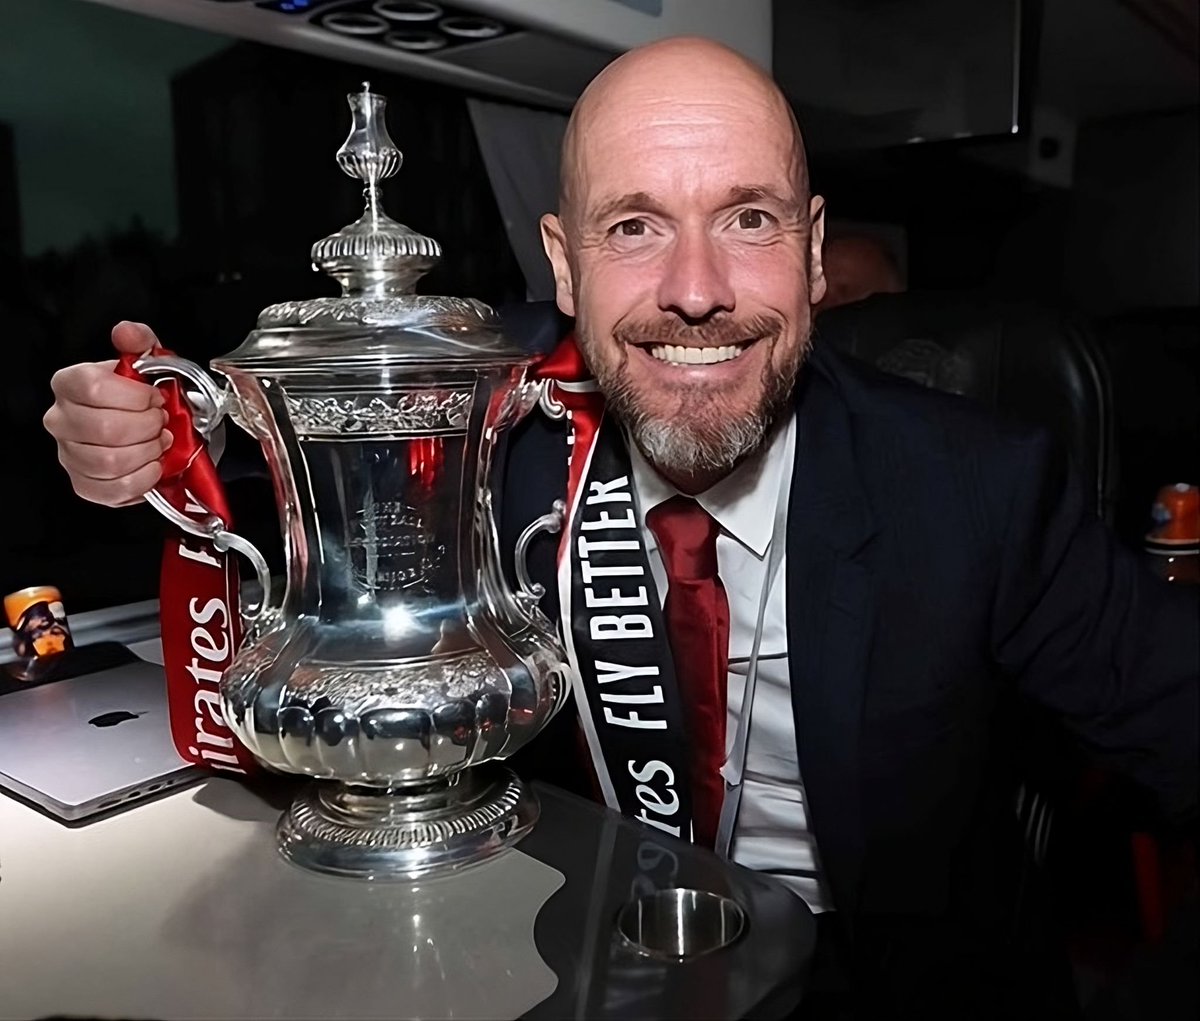 In the Netherlands, Ten Hag:

    ▪️ Helped FC Twente win their only ever Eredivisie title as assistant manager to Steve McClaren.

    ▪️ Led Go Ahead Eagles to their first promotion to the Eredivisie in 17 years in his first year of management.

    ▪️ Achieved promotion to the